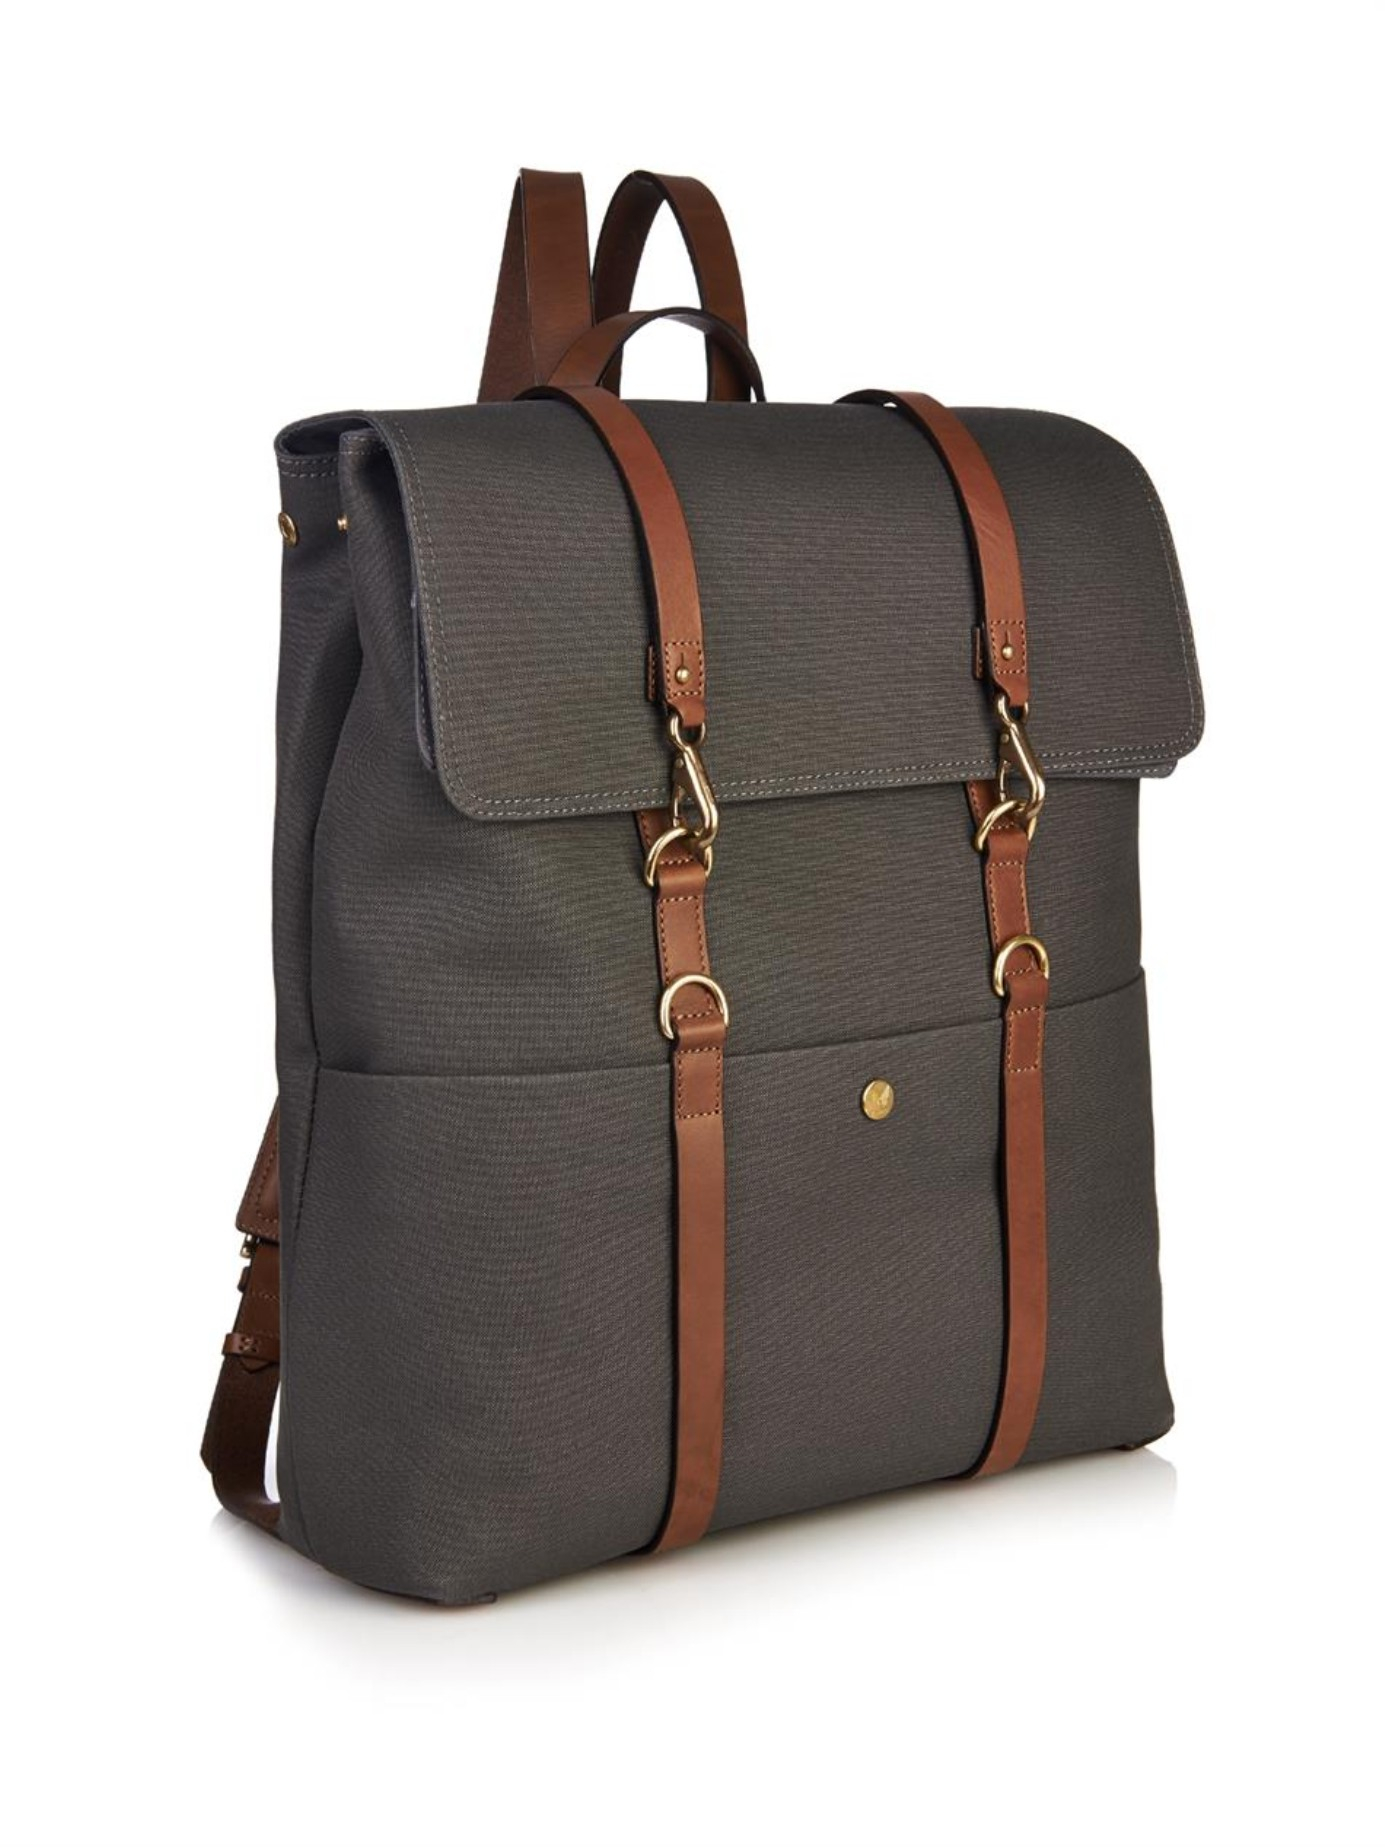 Lyst - Mismo Leather-Strap Backpack in Gray for Men